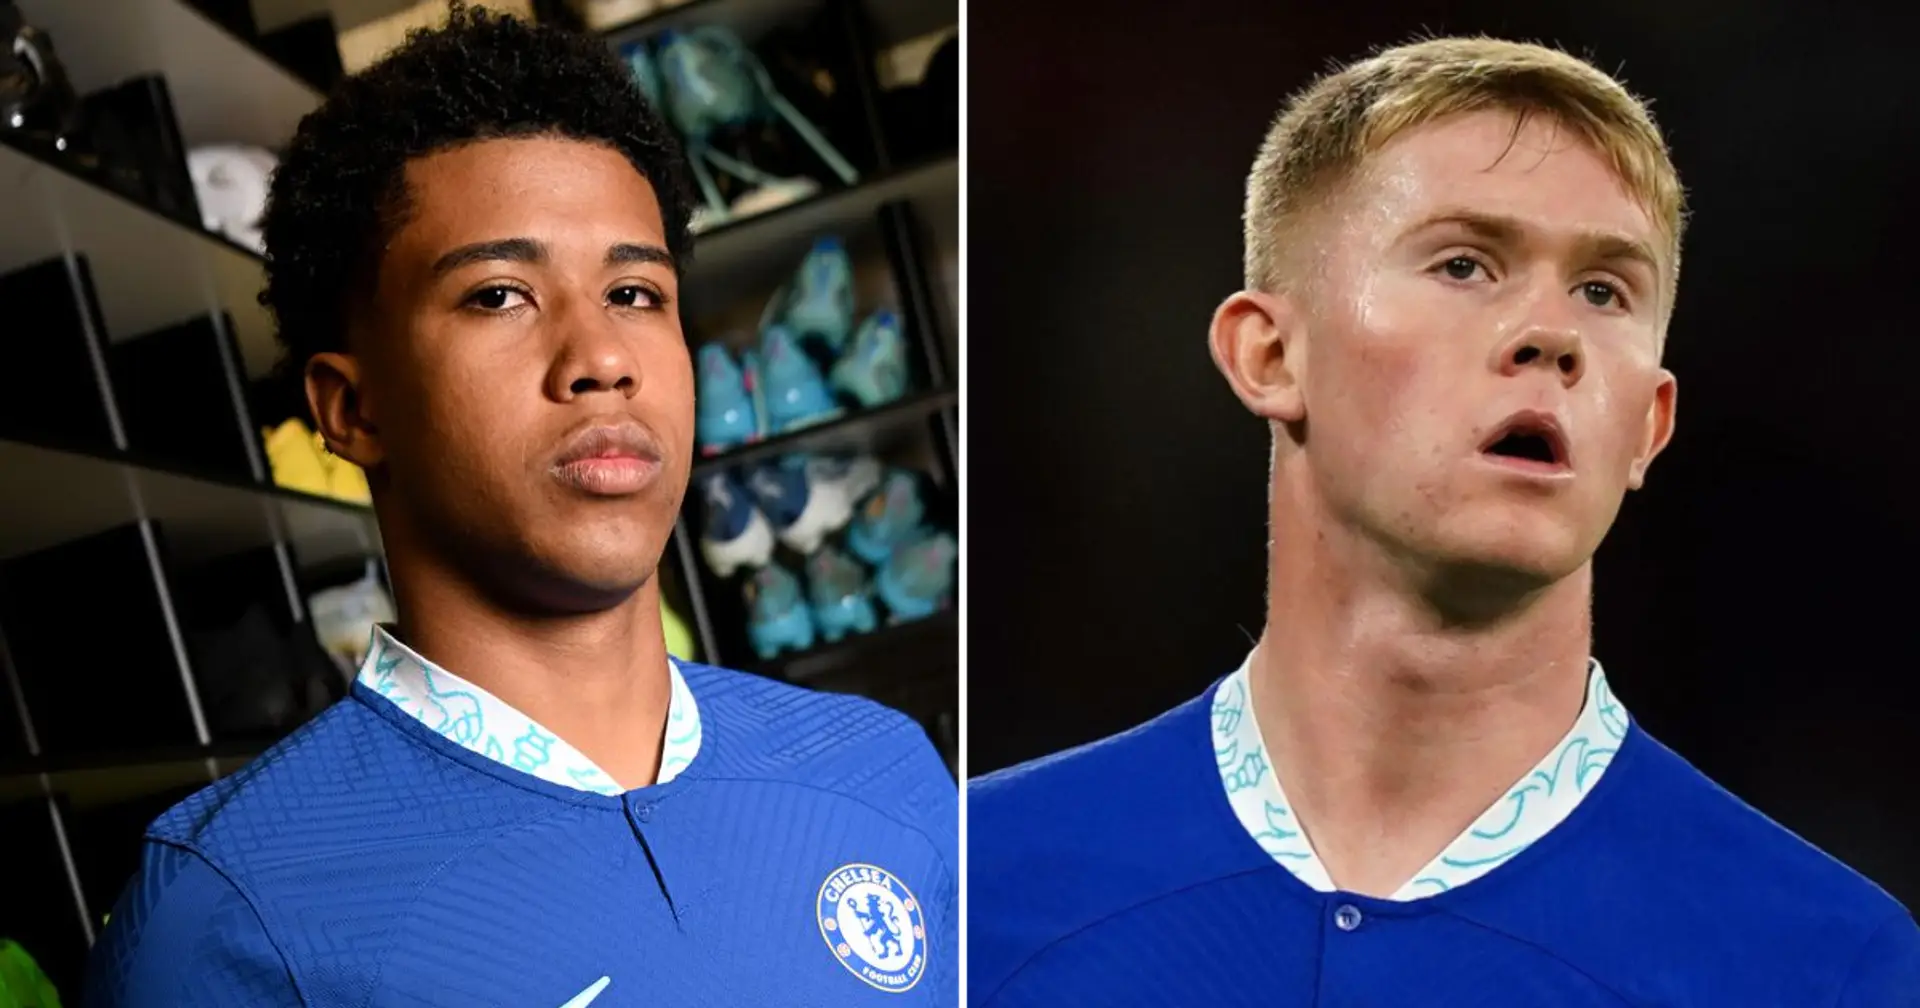 3 Chelsea youngsters named among 50 best wonderkids in football - 2 of them yet to feature for Blues